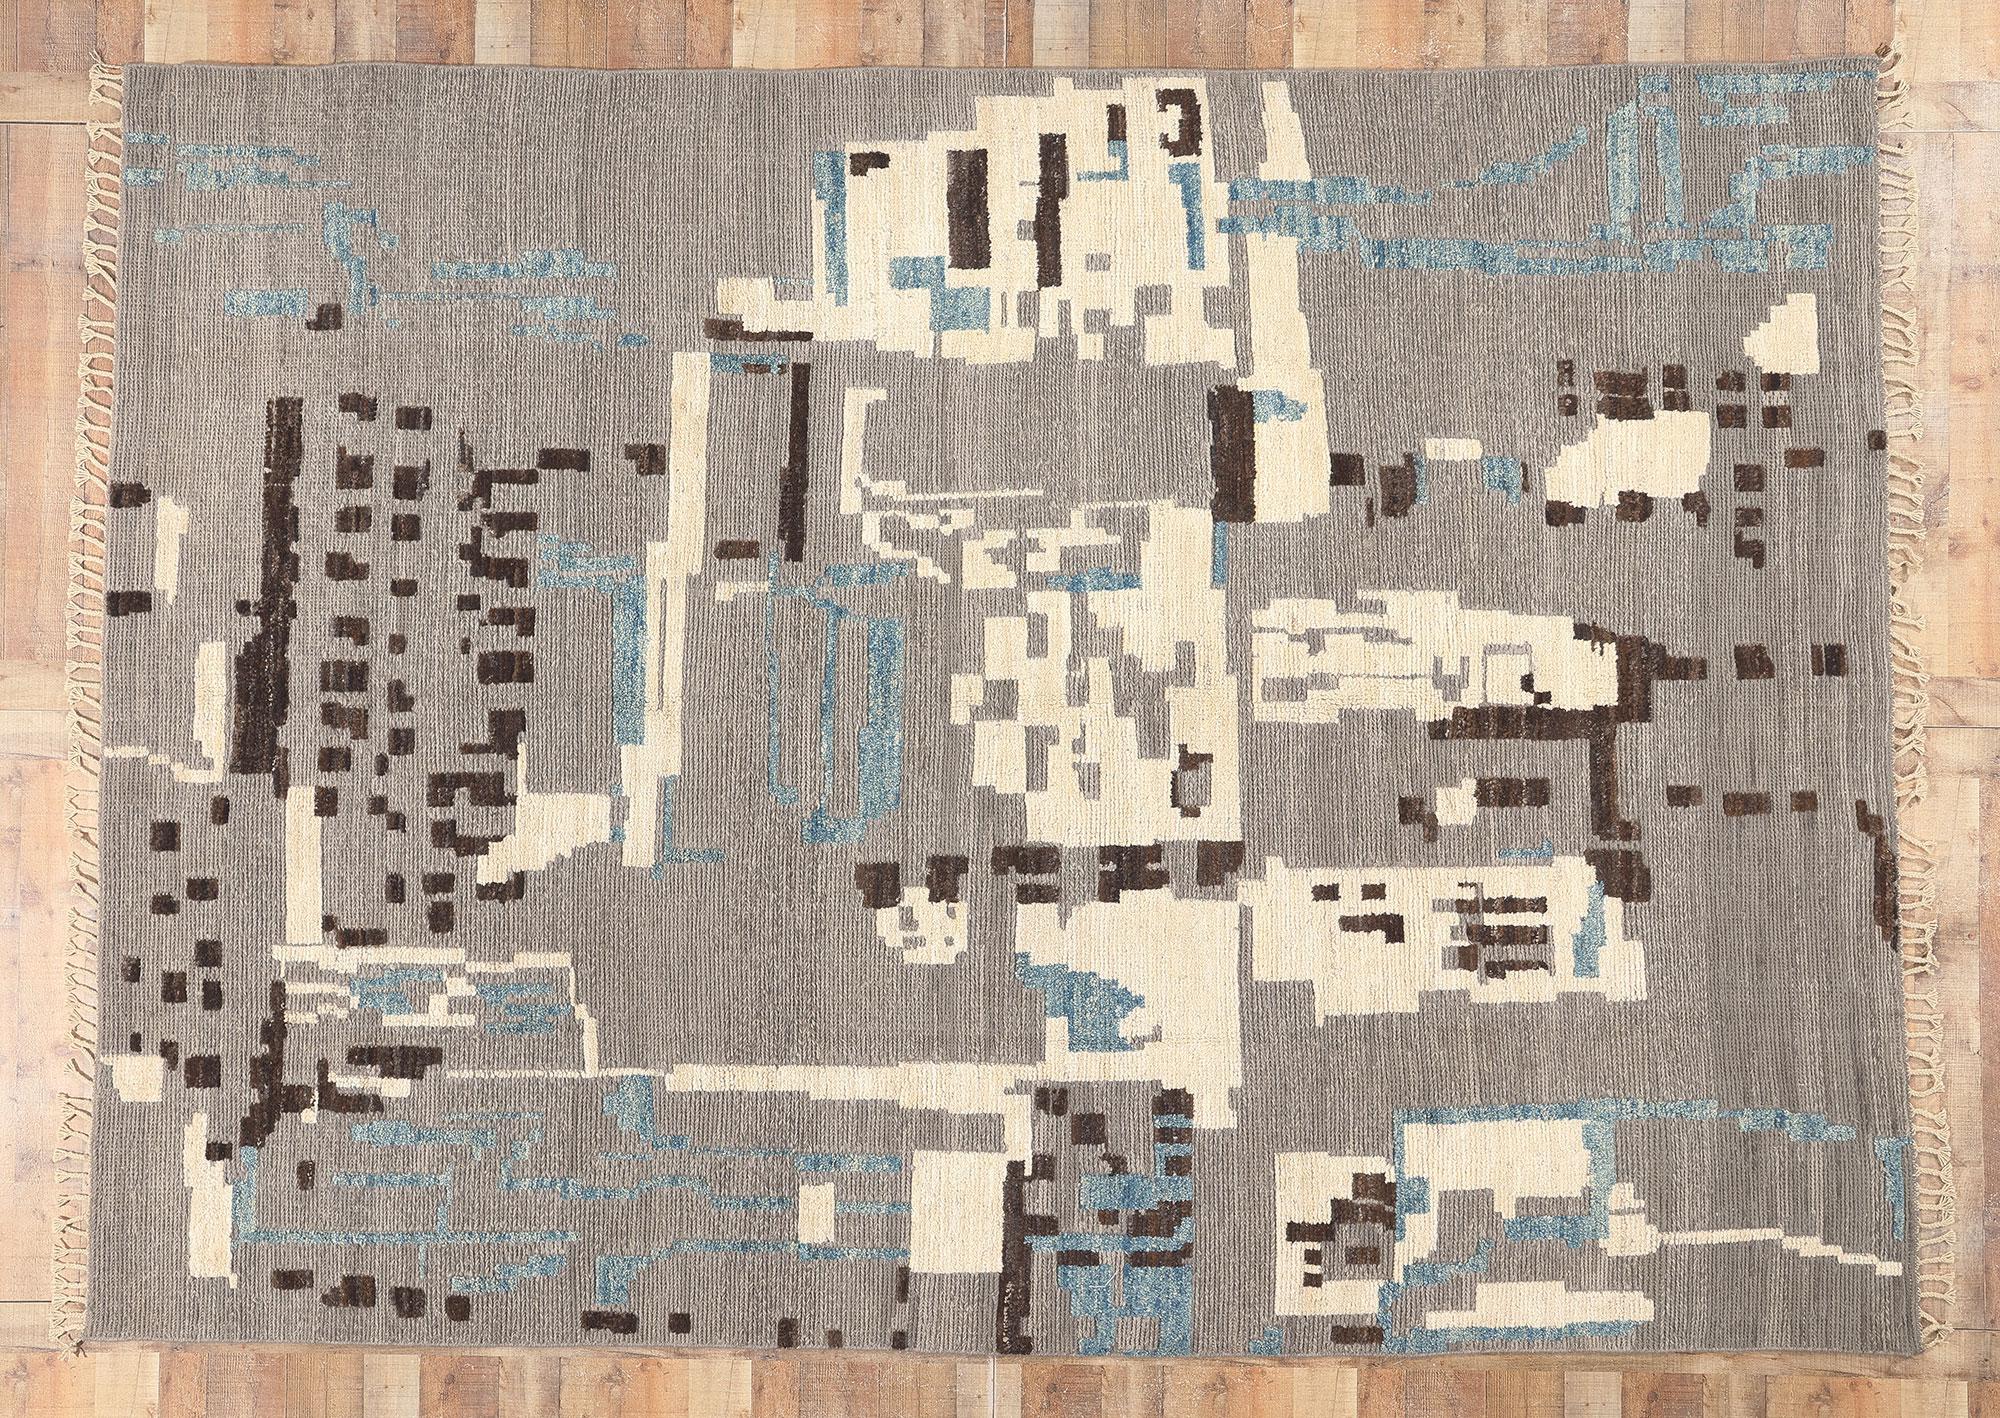 80985 Modern Moroccan Area Rug with Earth-Tone Colors, 08'09 x 12'01.
Emanating Biophilic Design with incredible detail and texture, this large Moroccan high-low rug is a captivating vision of woven beauty. The raised design and earthy colorway